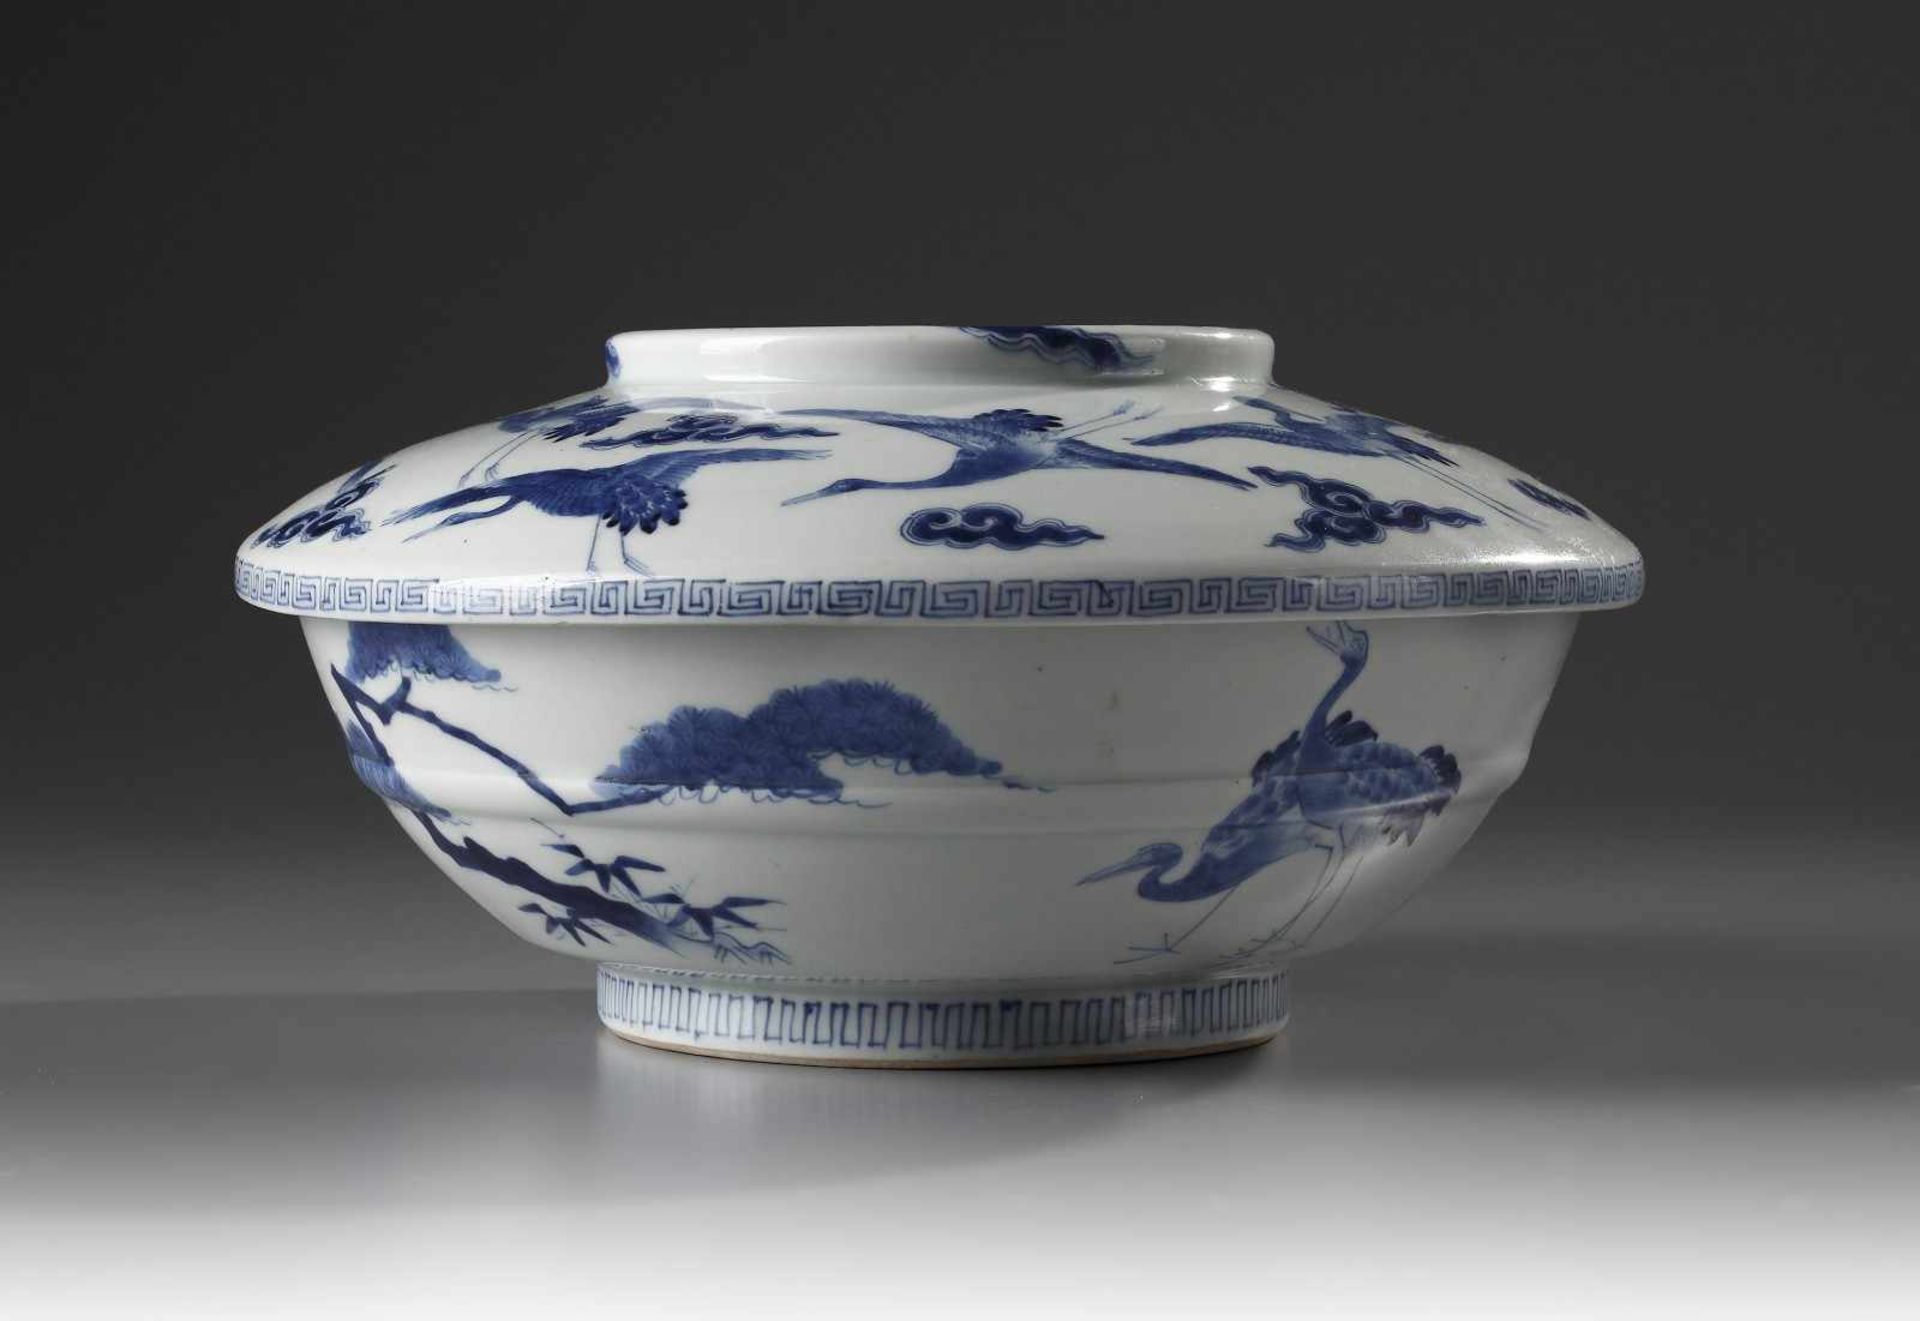 Japanese Hirado Porcelain Bowl with Cover of rounded form, decorated in underglaze blue with a